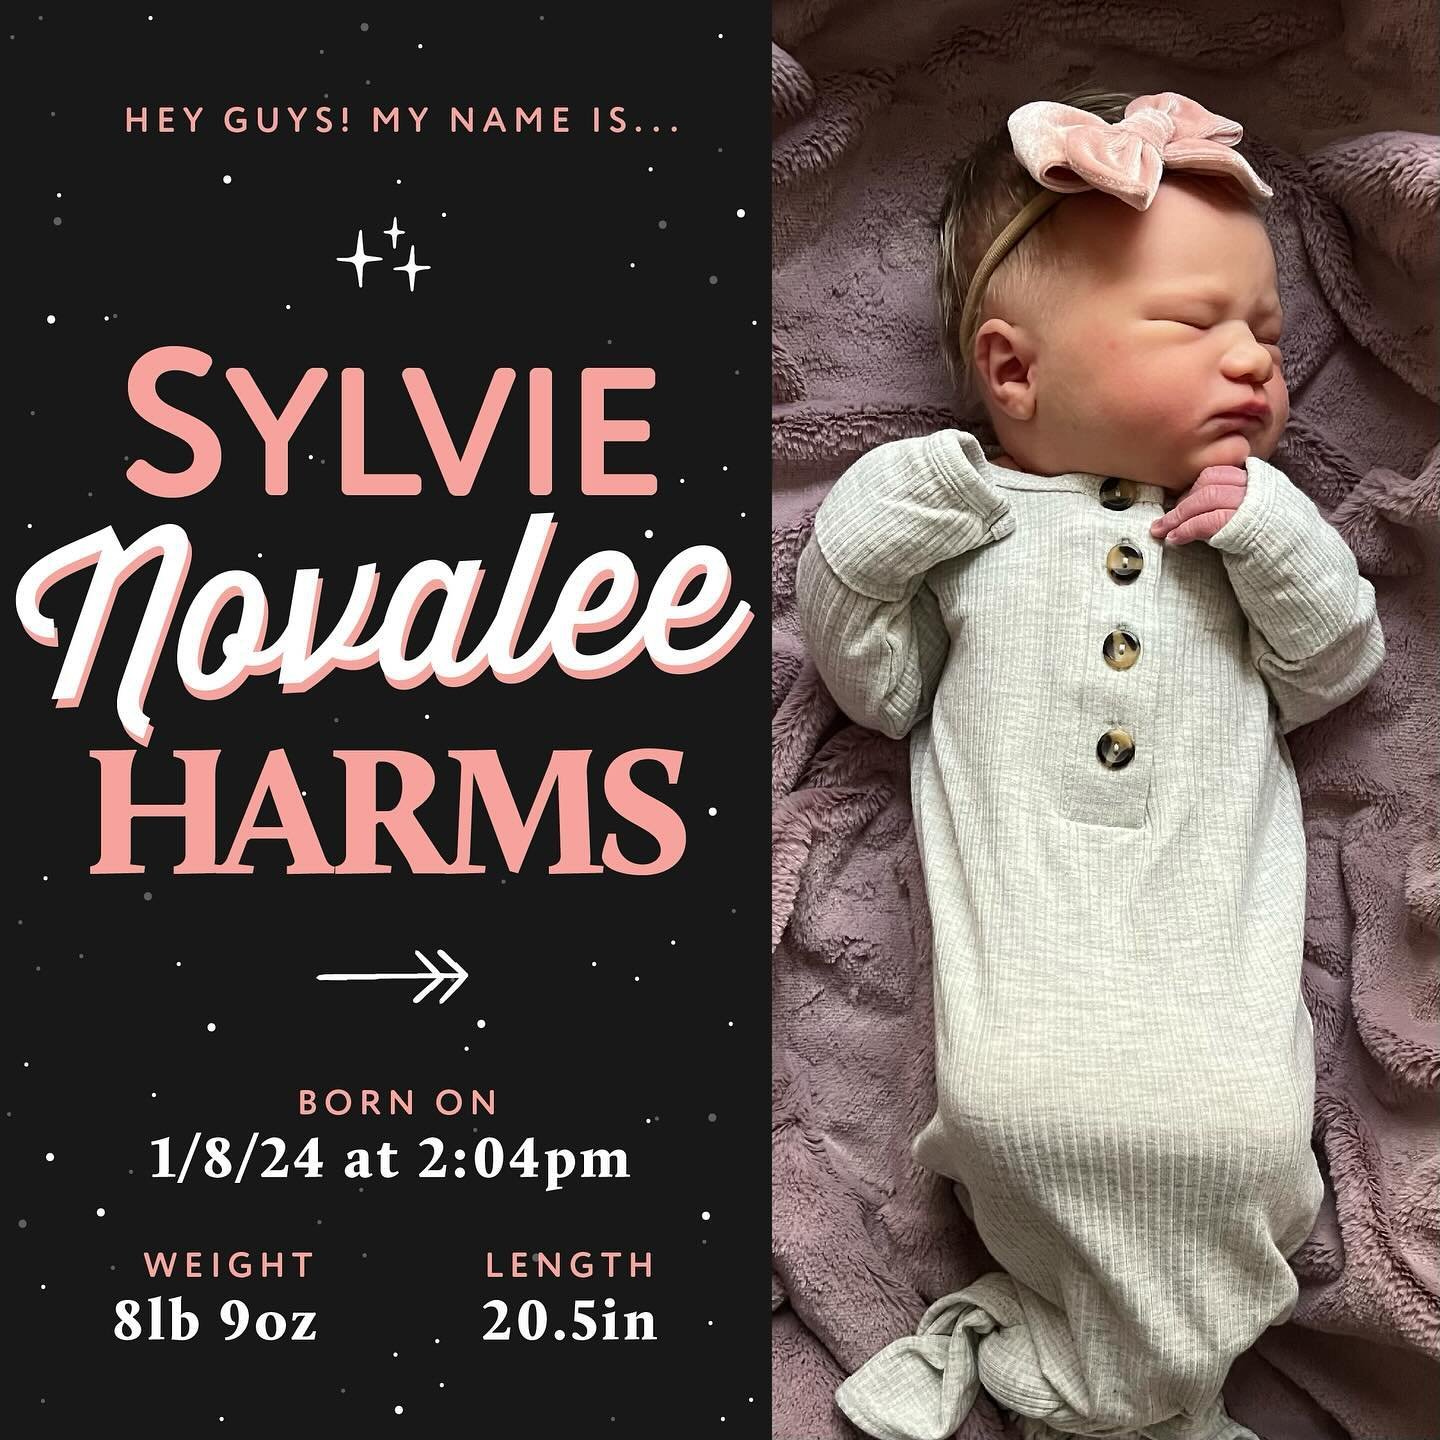 We are thrilled to introduce our sweet daughter, Sylvie Novalee, born on the snowiest Monday afternoon &mdash;the most beautiful way to start this new year.

One of the first songs we heard when we found out we were expecting again was &ldquo;To Not 